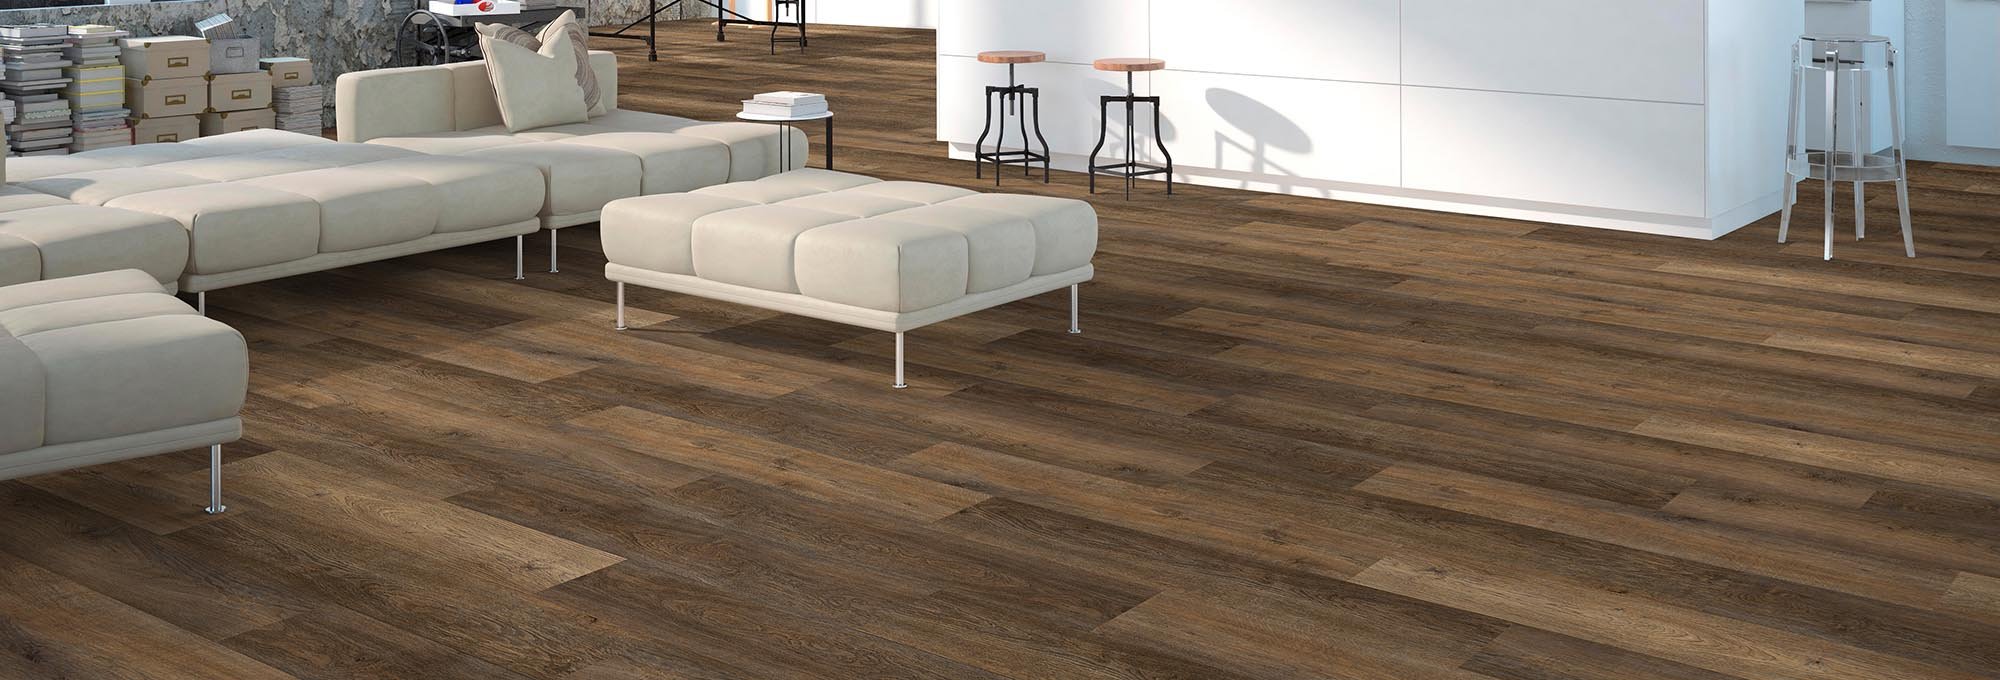 Shop Flooring Products from Signature Flooring & Interiors in Troy, IL